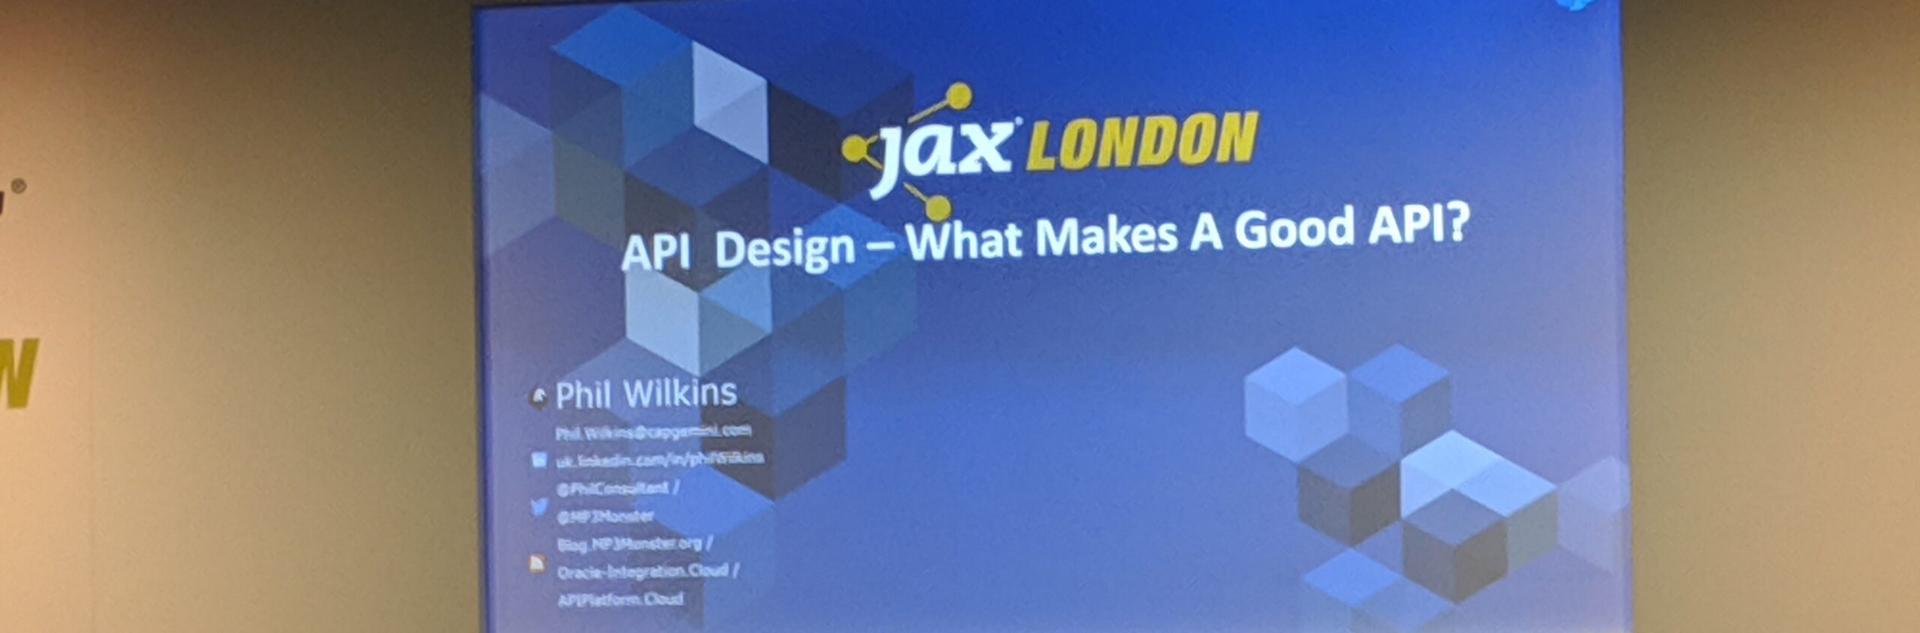 Featured image for JAX London Conference 2019